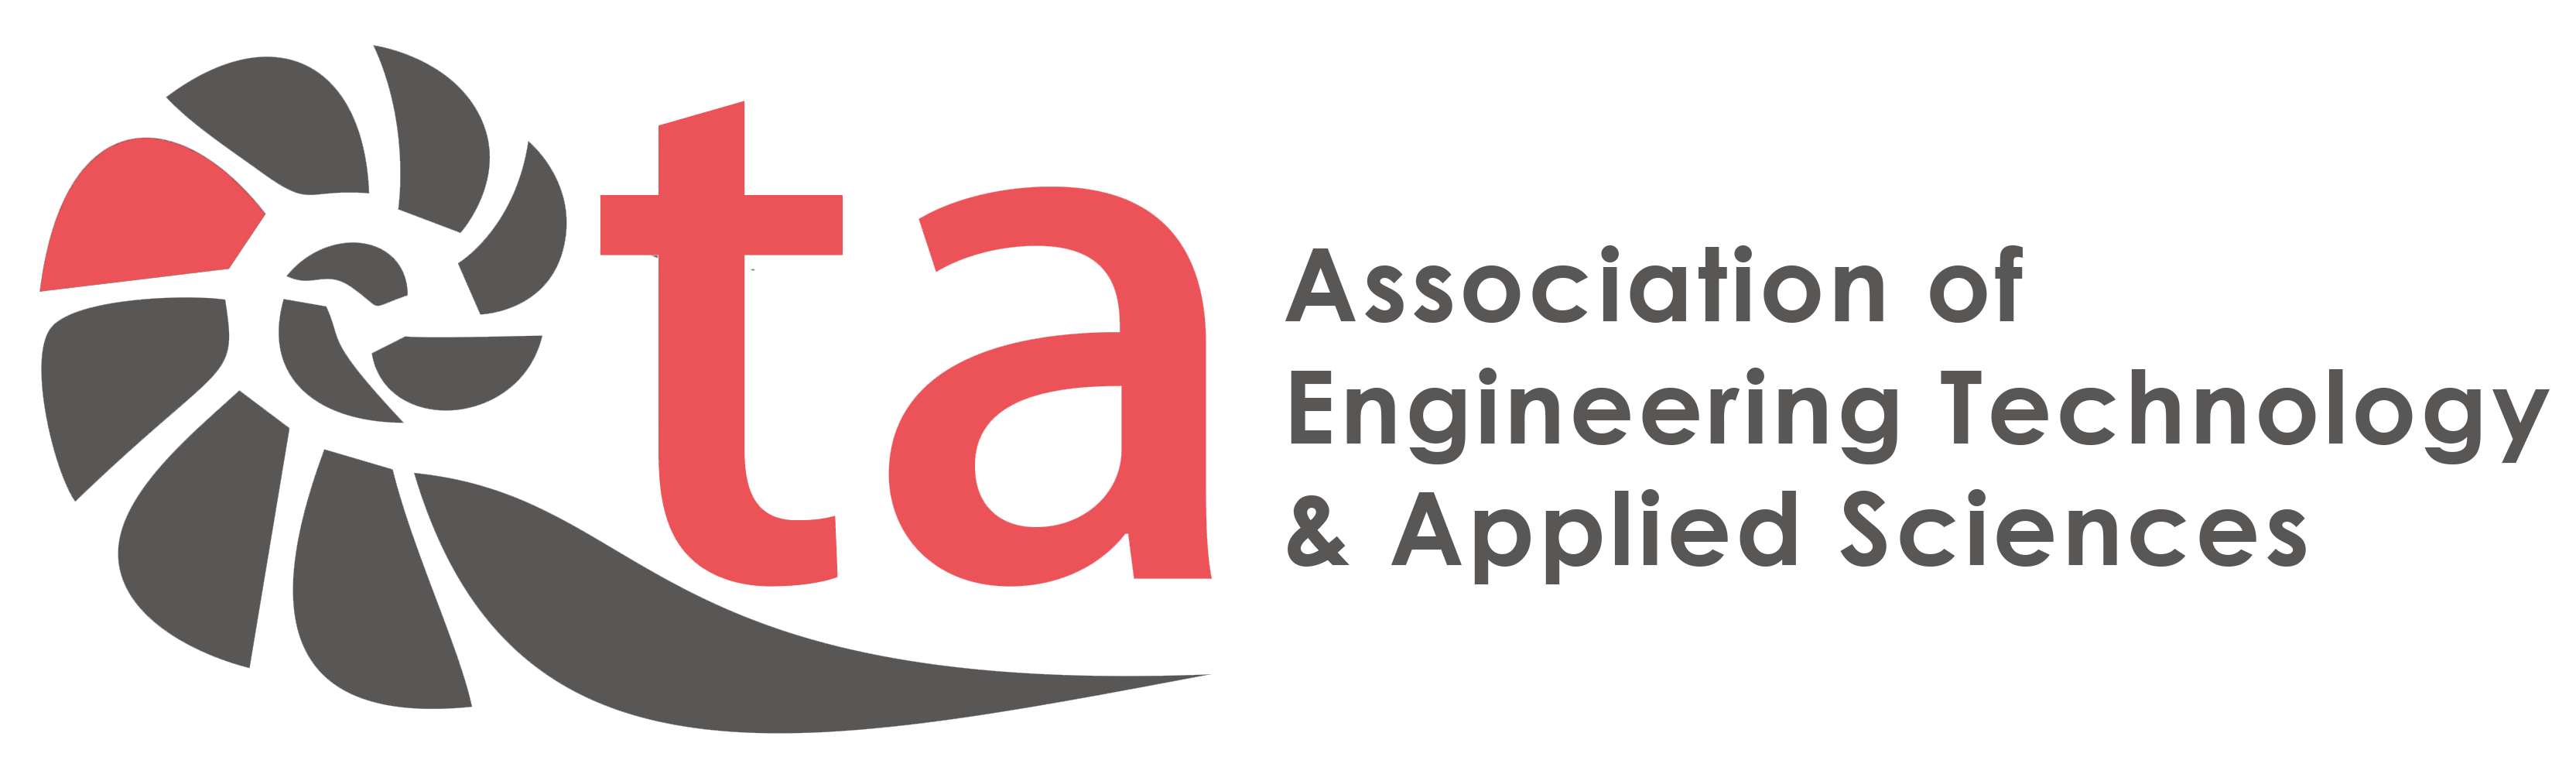 AETA International Conference on Advanced Engineering Technology, Science Management, Applied Sciences & Information and Communication Tech  (ESAI)